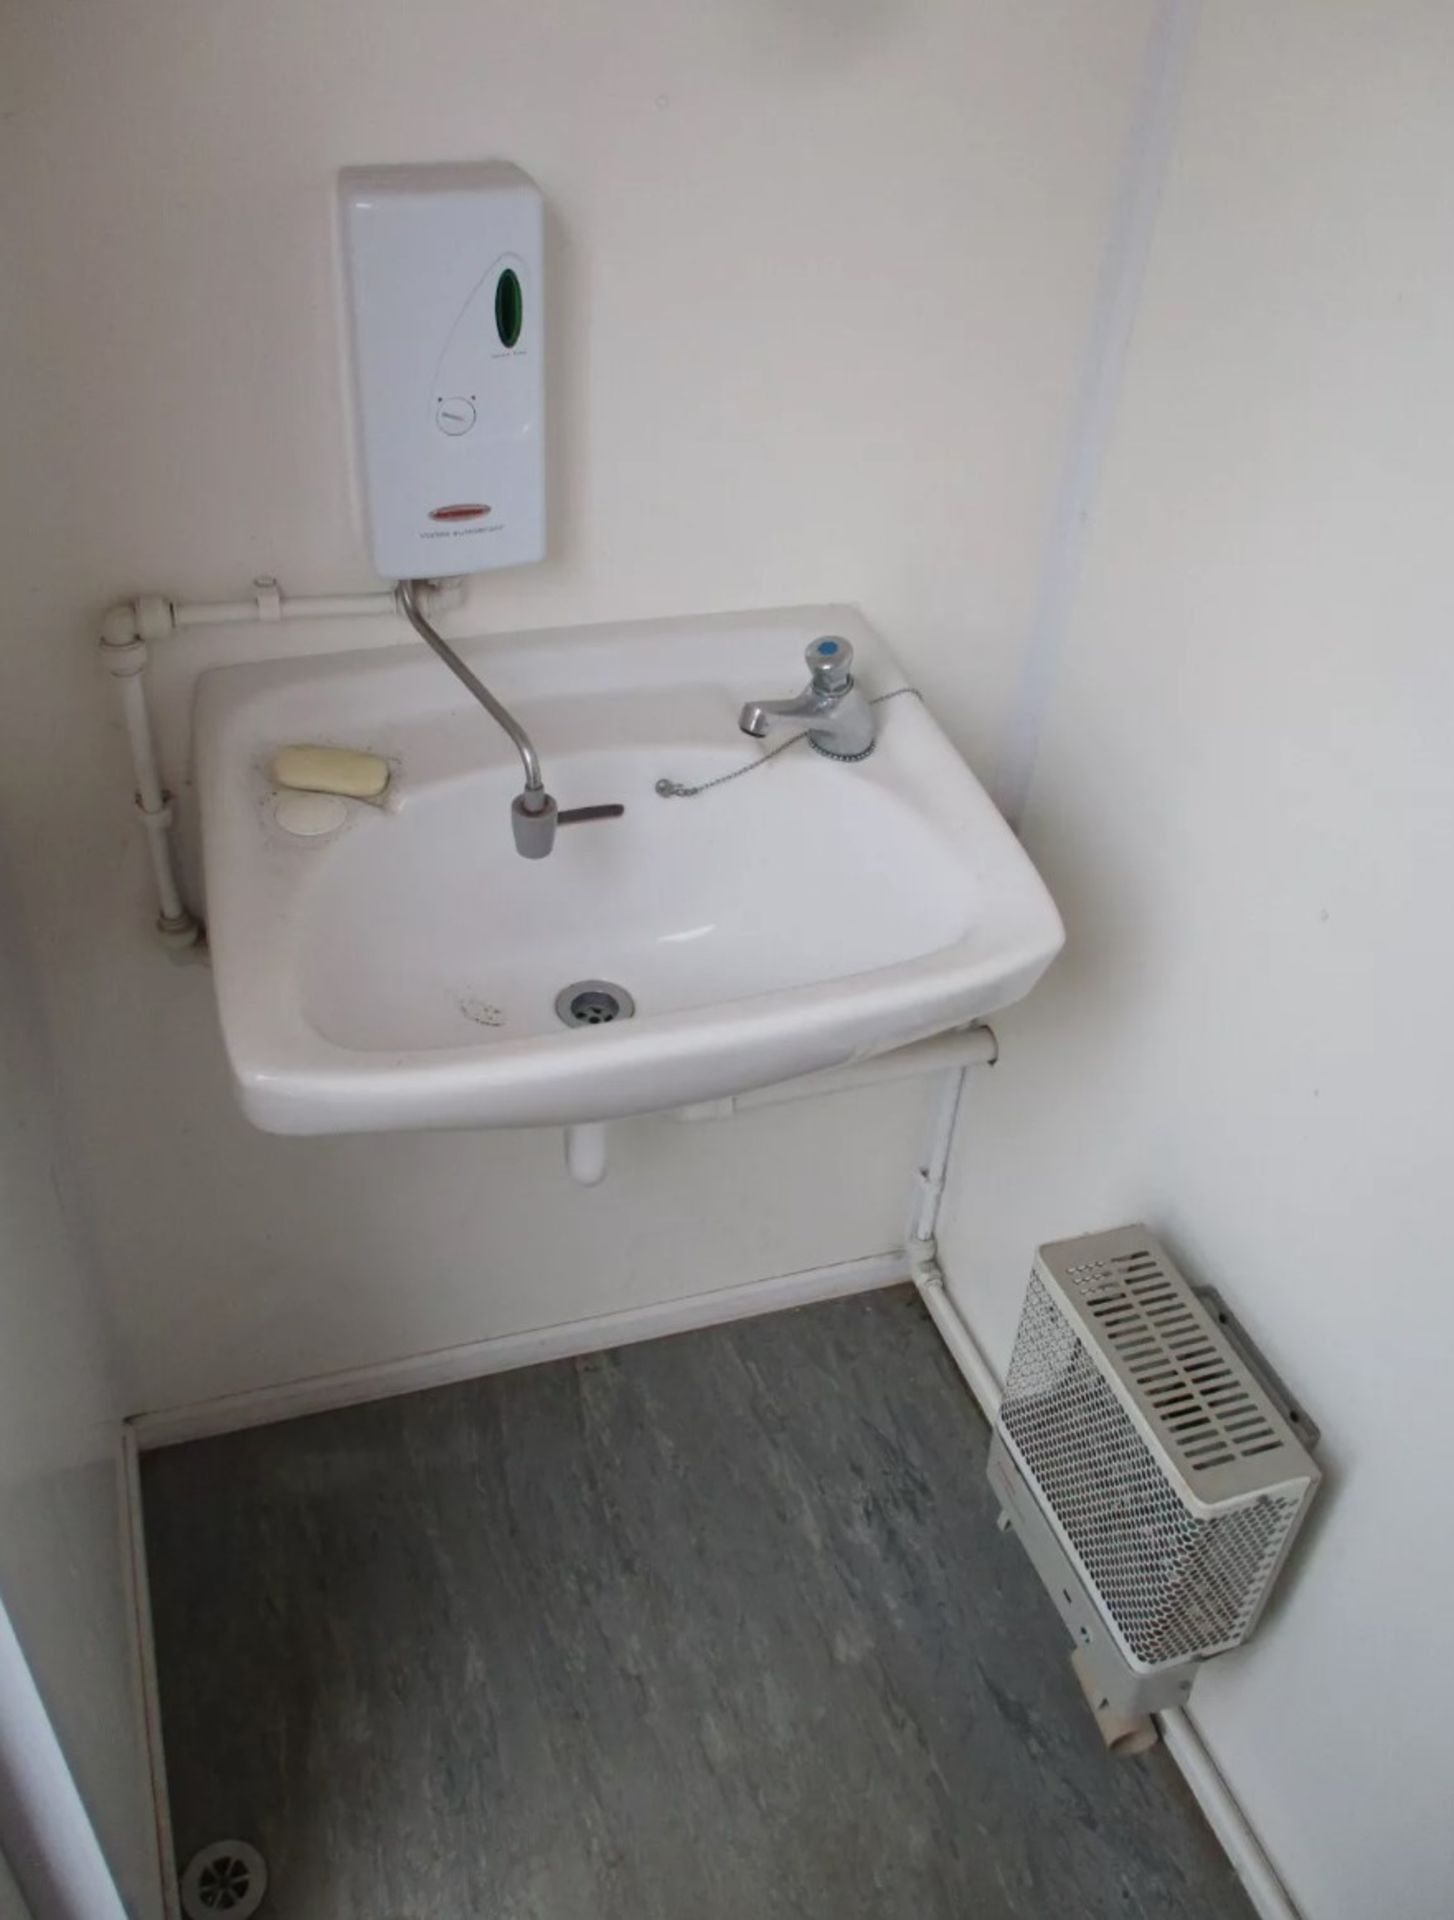 SHIPPING CONTAINER TOILET BLOCK: YOUR COMPLETE PORTABLE SANITATION SOLUTION - Image 6 of 11